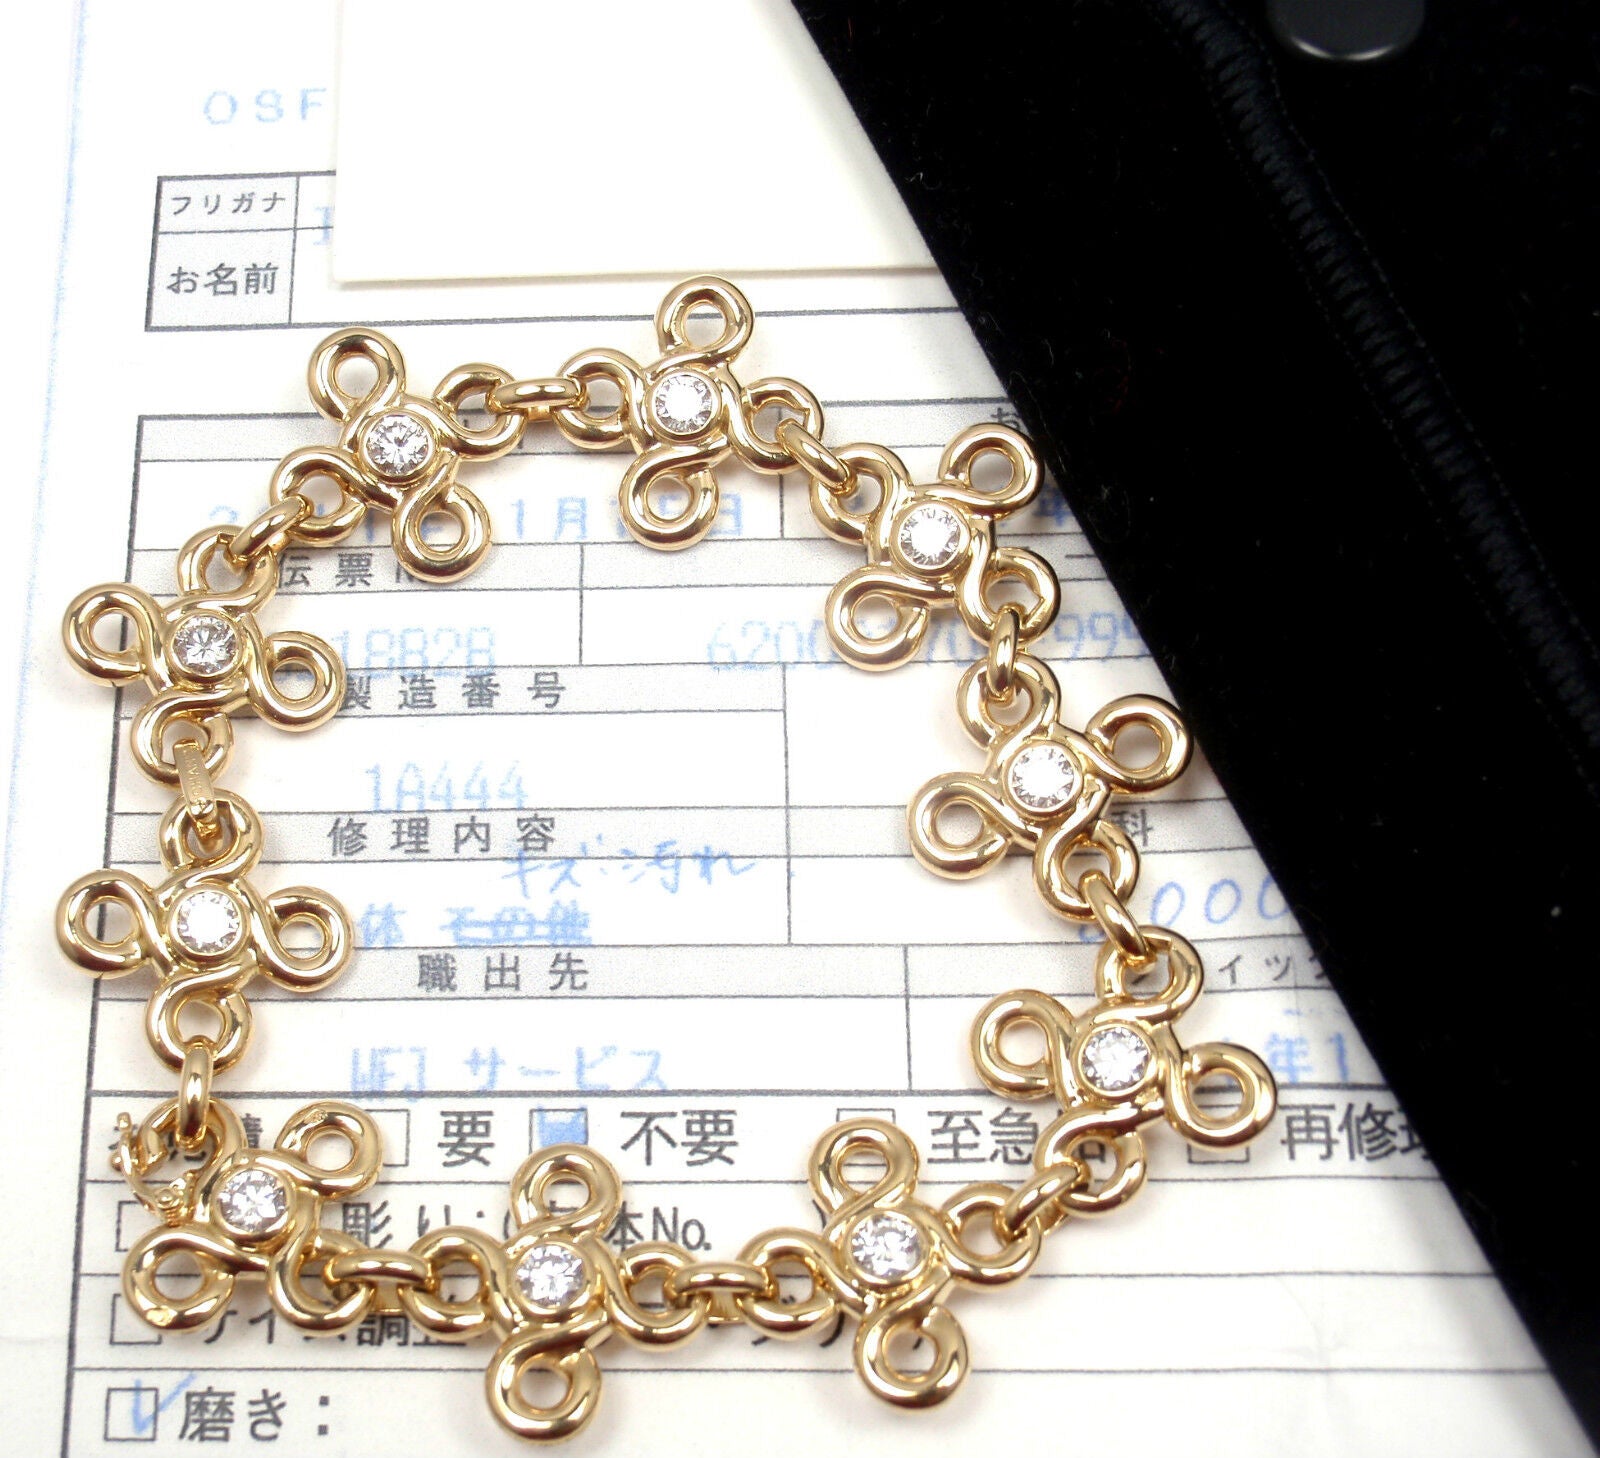 CHANEL Jewelry & Watches:Fine Jewelry:Bracelets & Charms RARE! AUTHENTIC CHANEL 18K YELLOW GOLD DIAMOND BRACELET PAPERS